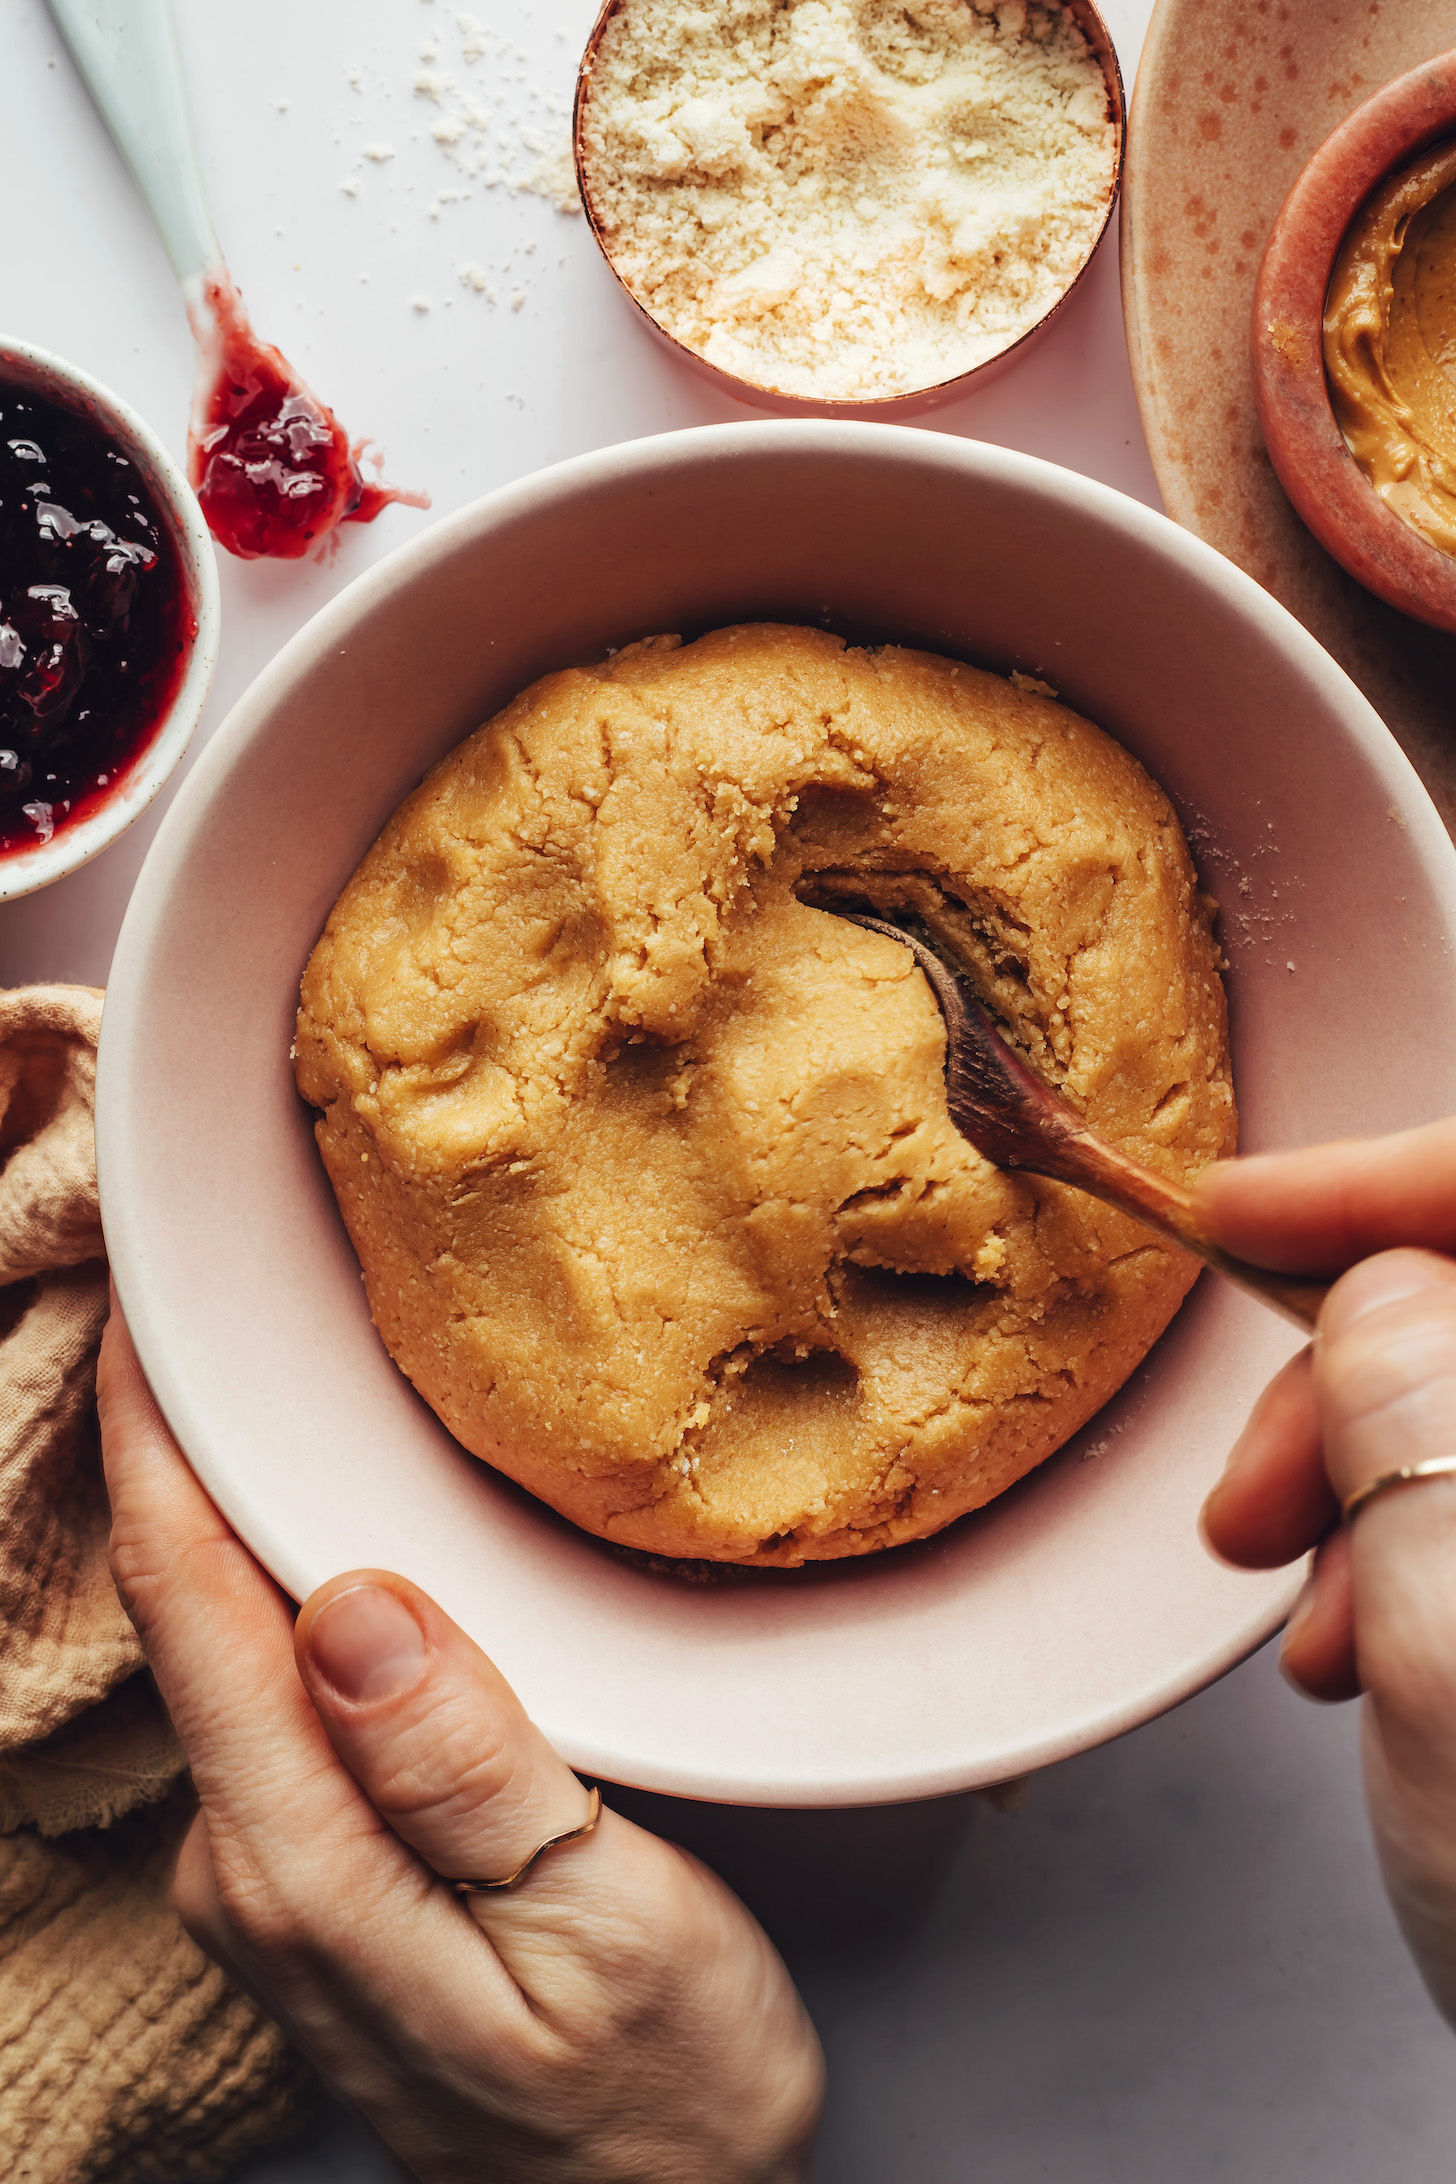 Spoon in a bowl of gluten-free peanut butter thumbprint cookie dough